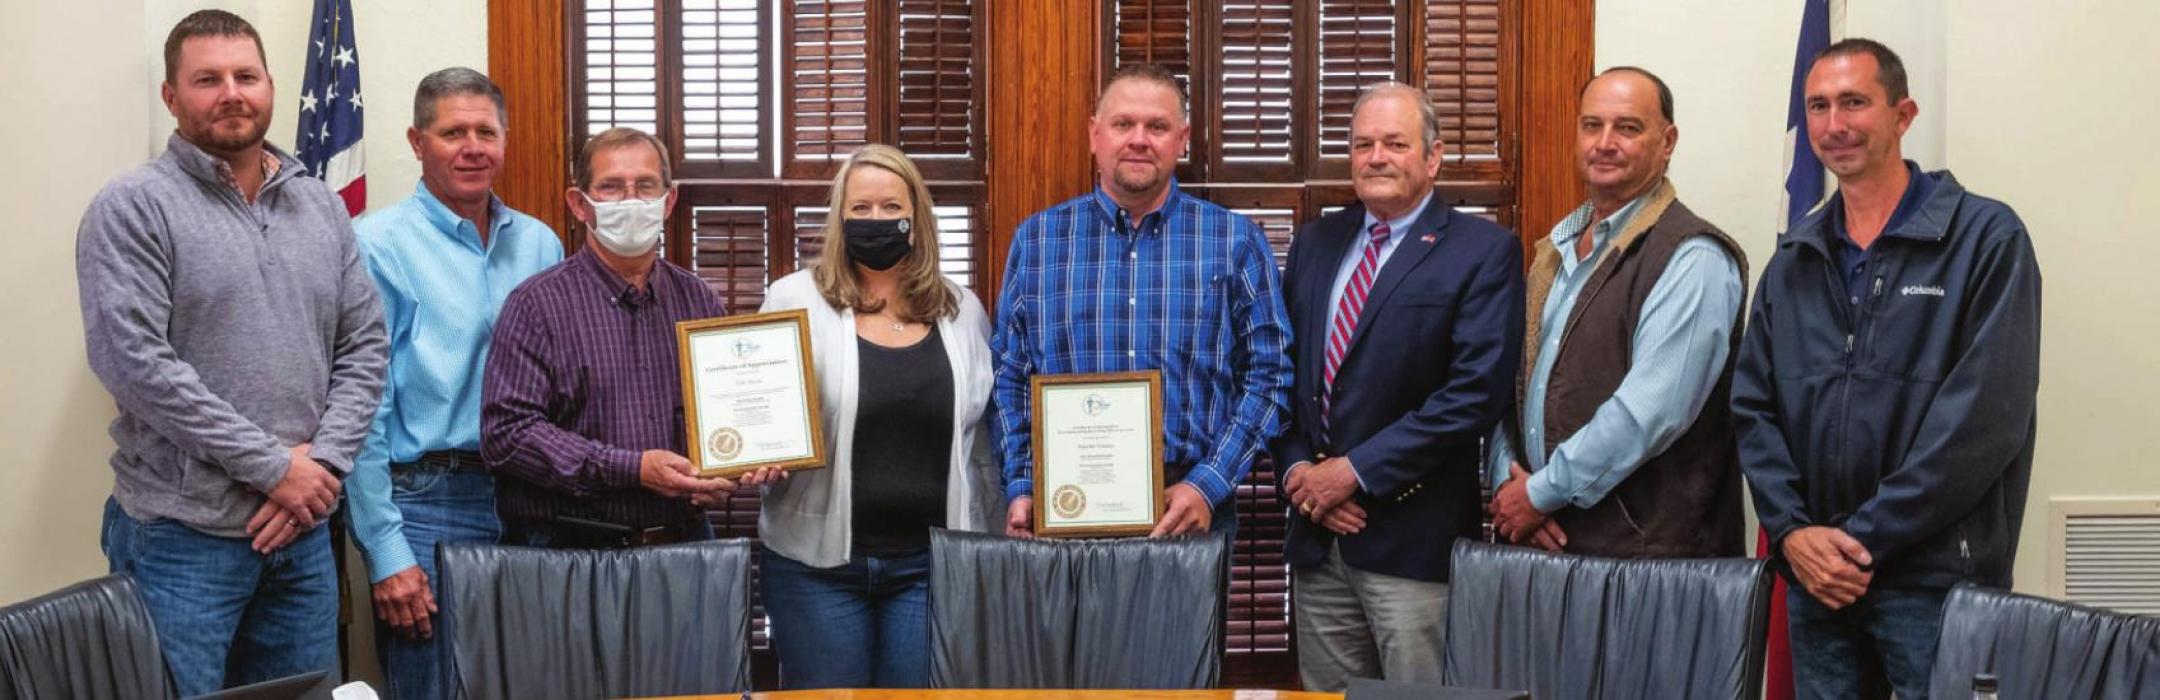 Rachel Hering of Keep Texas Beautiful presented awards to retired Pct. 4 Commissioner Tom Muras and the Fayette County Recycling Center for outstanding recycling efforts. Pictured (from left) are Pct. 4 Commissioner Drew Brossmann, Pct. 3 Commissioner Harvey Berckenhoff, Muras, Hering, Fayette County Recycling Center Manager Paul Zapalac, County Judge Joe Weber, Pct. 2 Commissioner Luke Sternadel and Pct. 1 Commissioner Jason McBroom. Photo by Andy Behlen